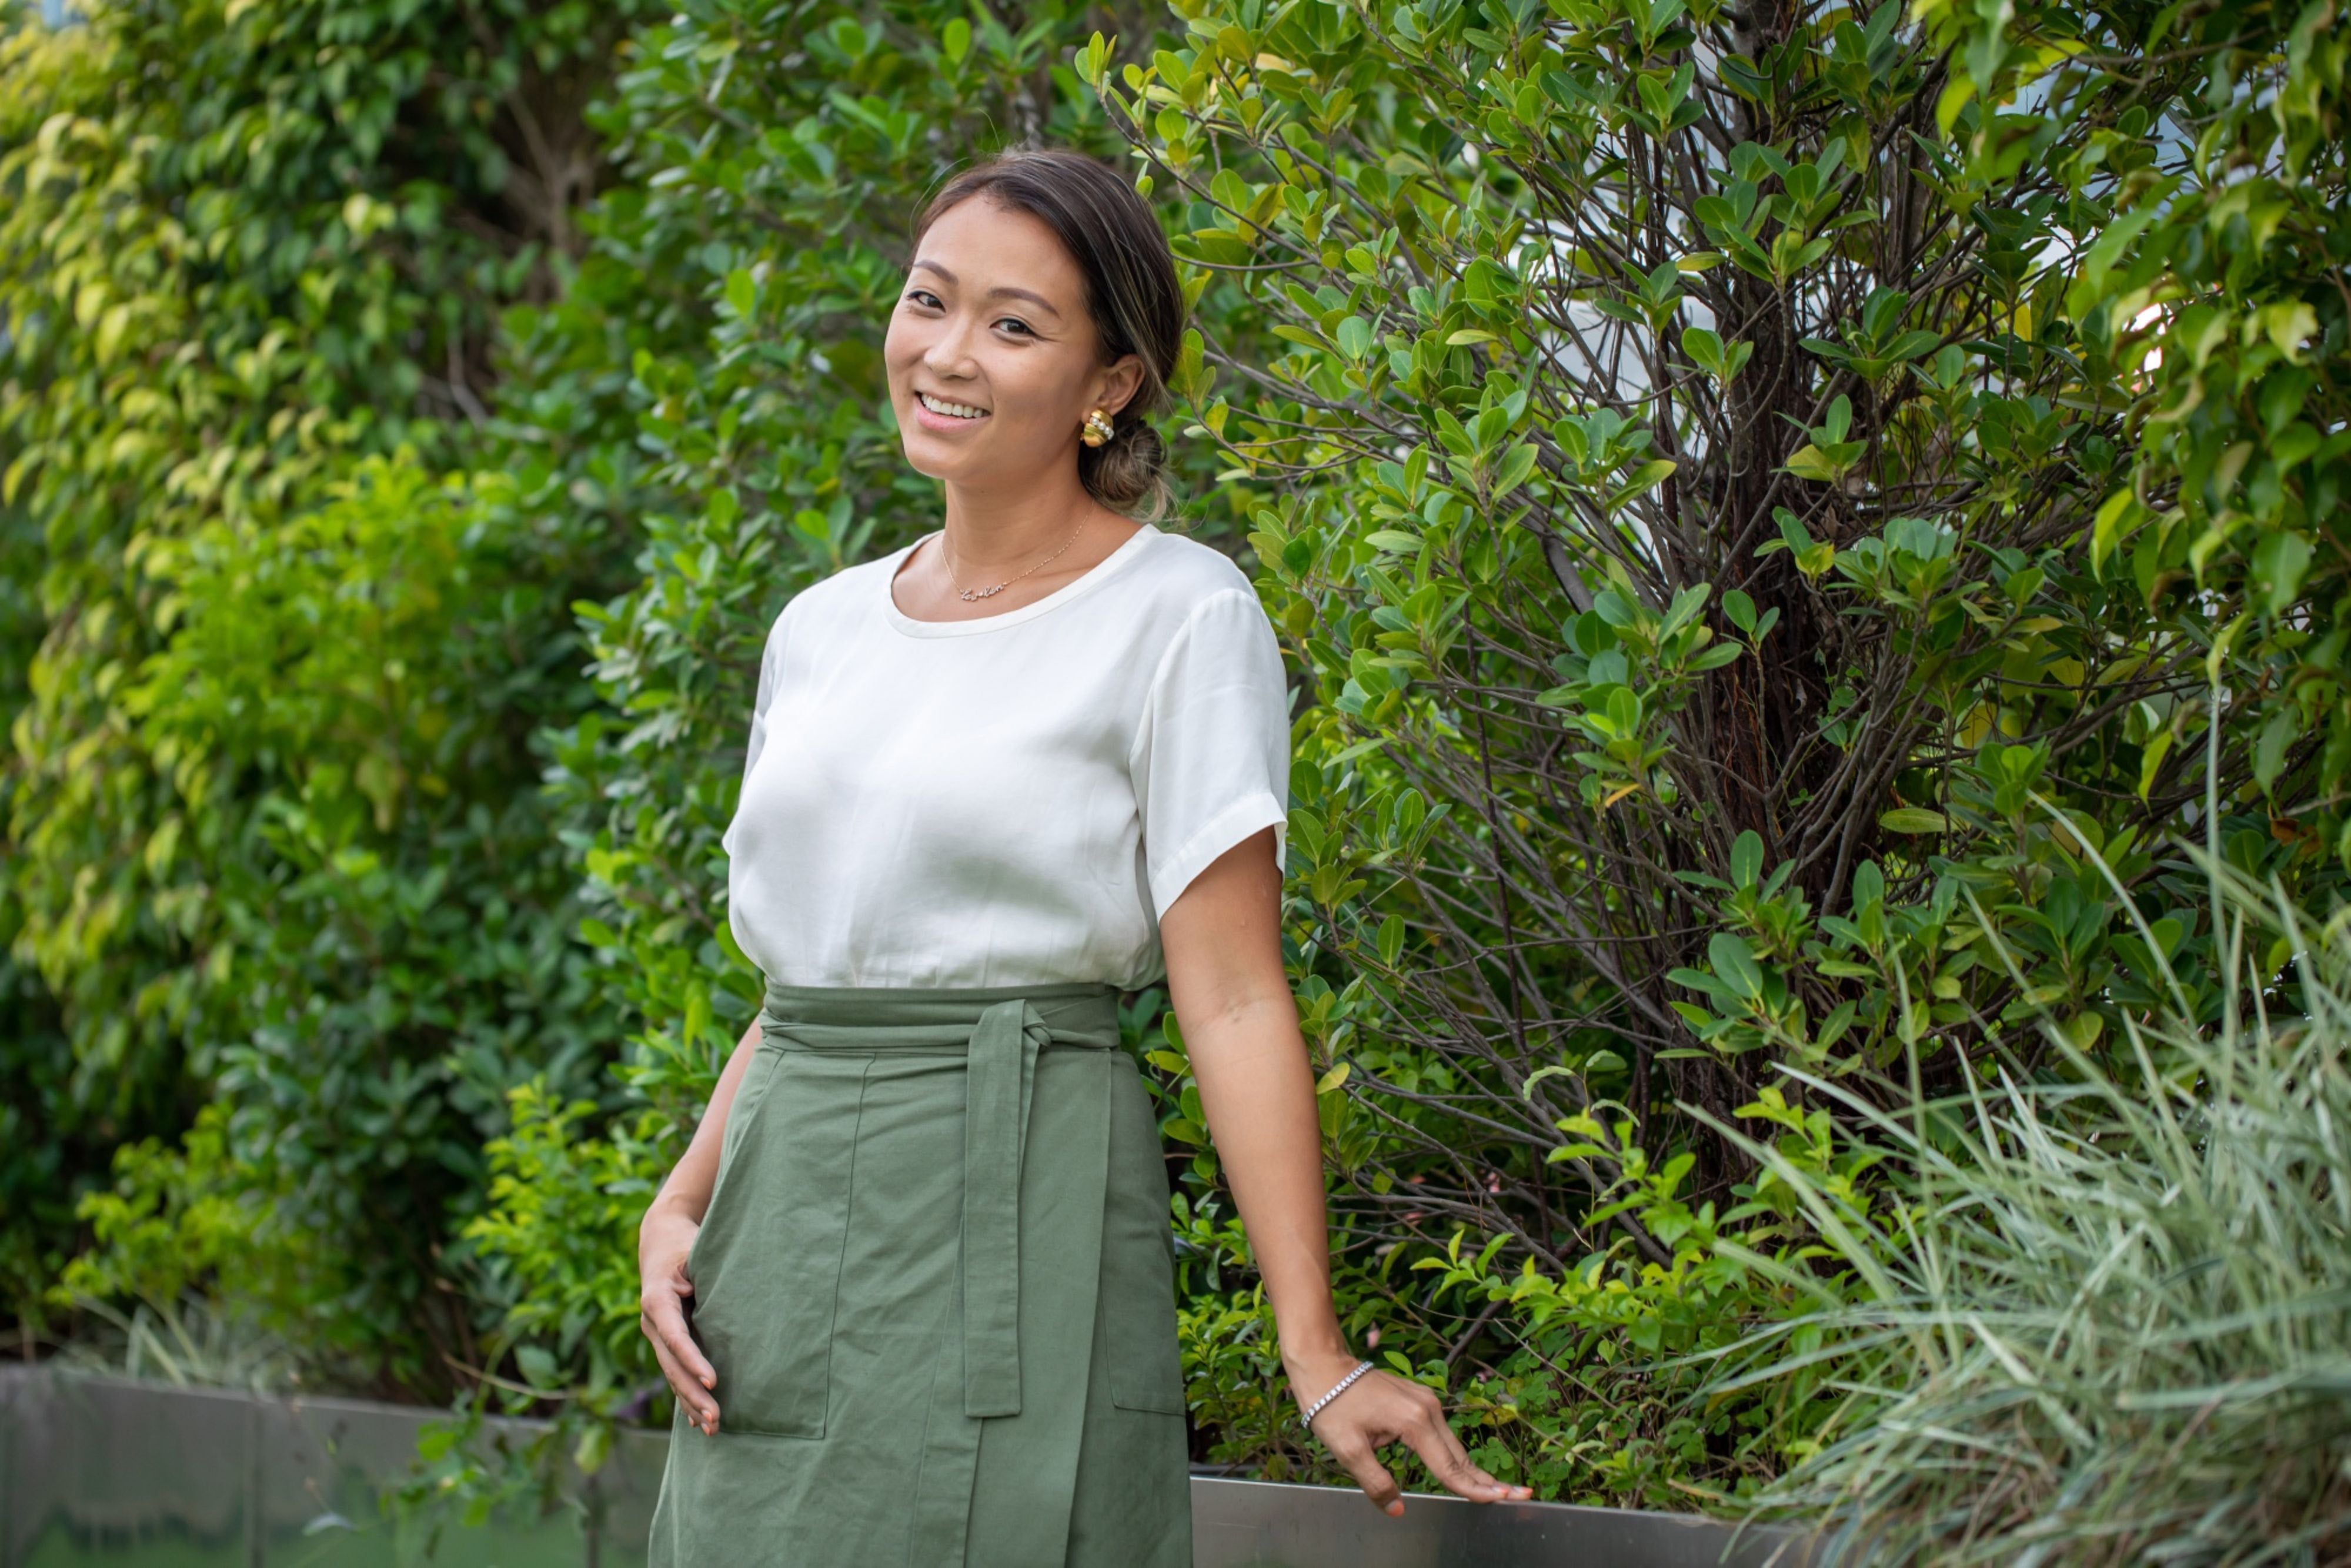 Veronica Chou is searching out green startups that have mass-market potential